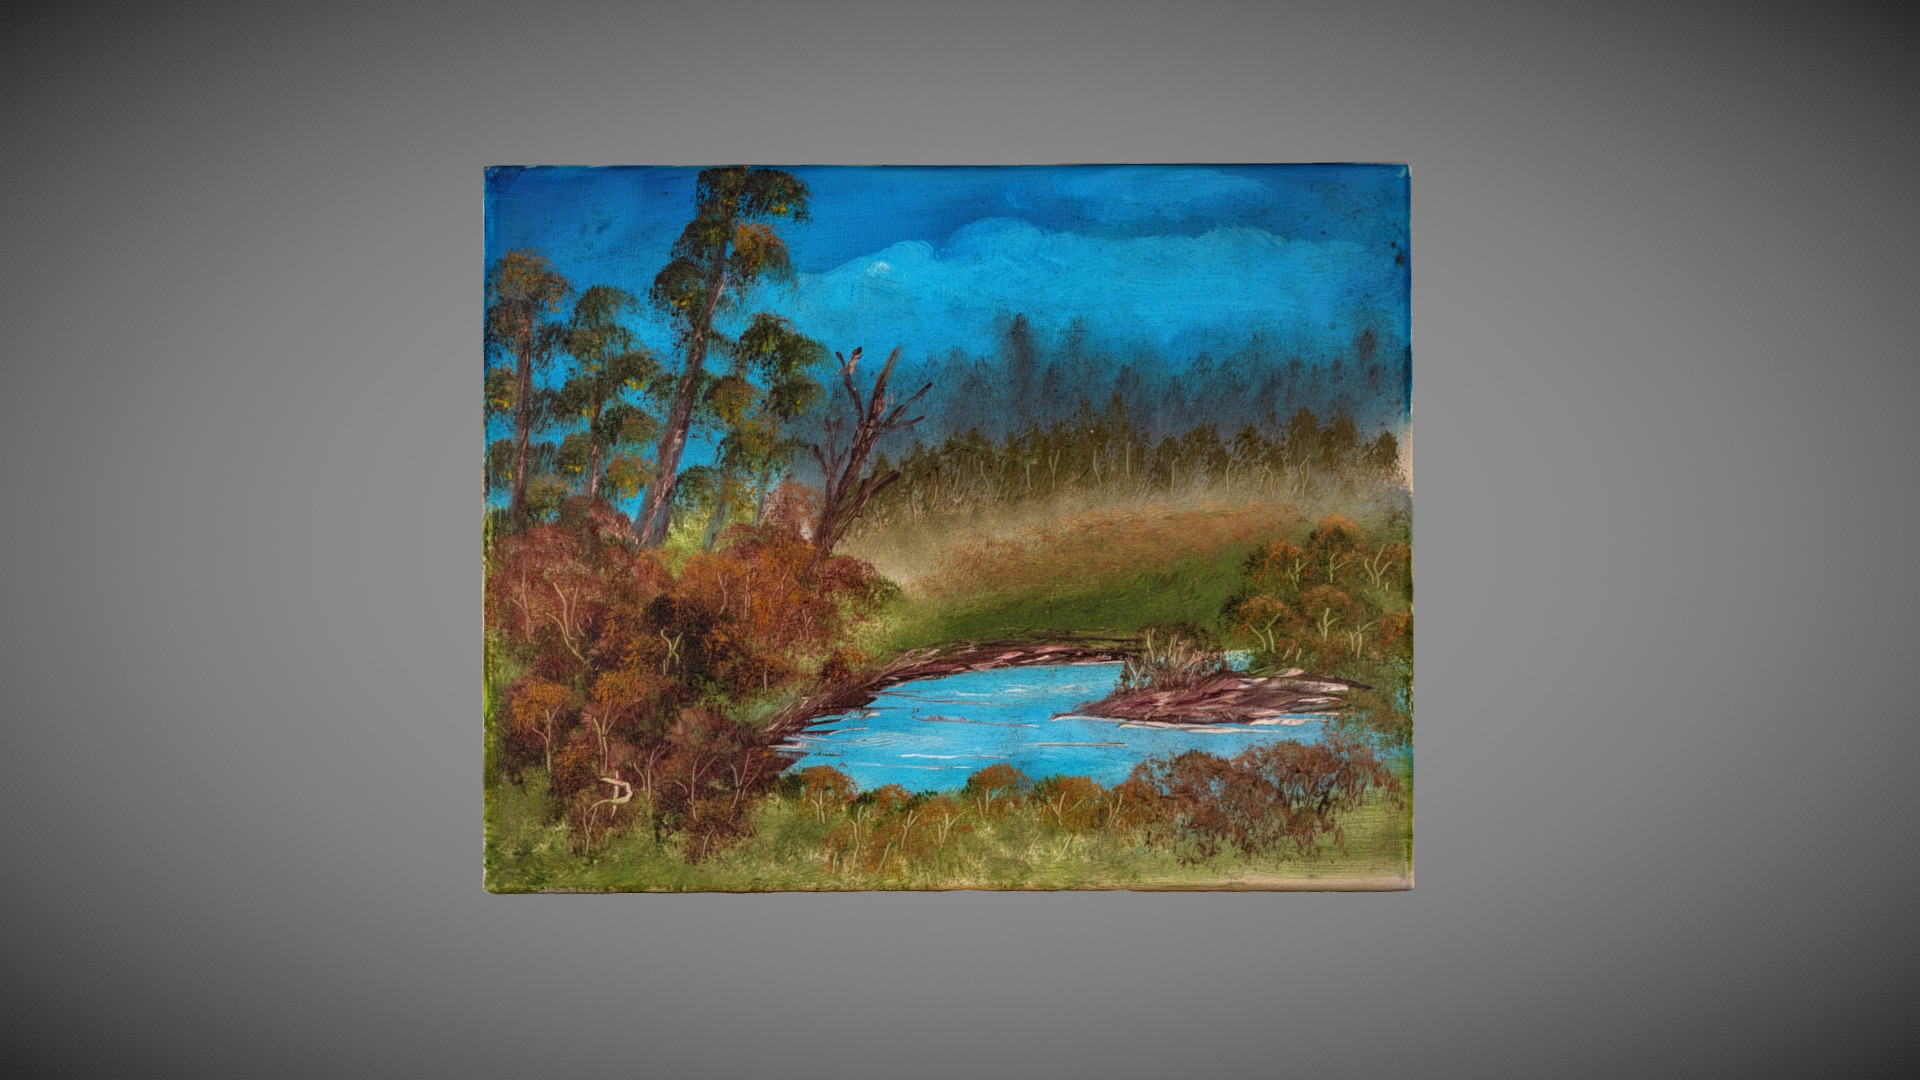 3D model Landscape Painting - This is a 3D model of the Landscape Painting. The 3D model is about a painting of a river and trees.